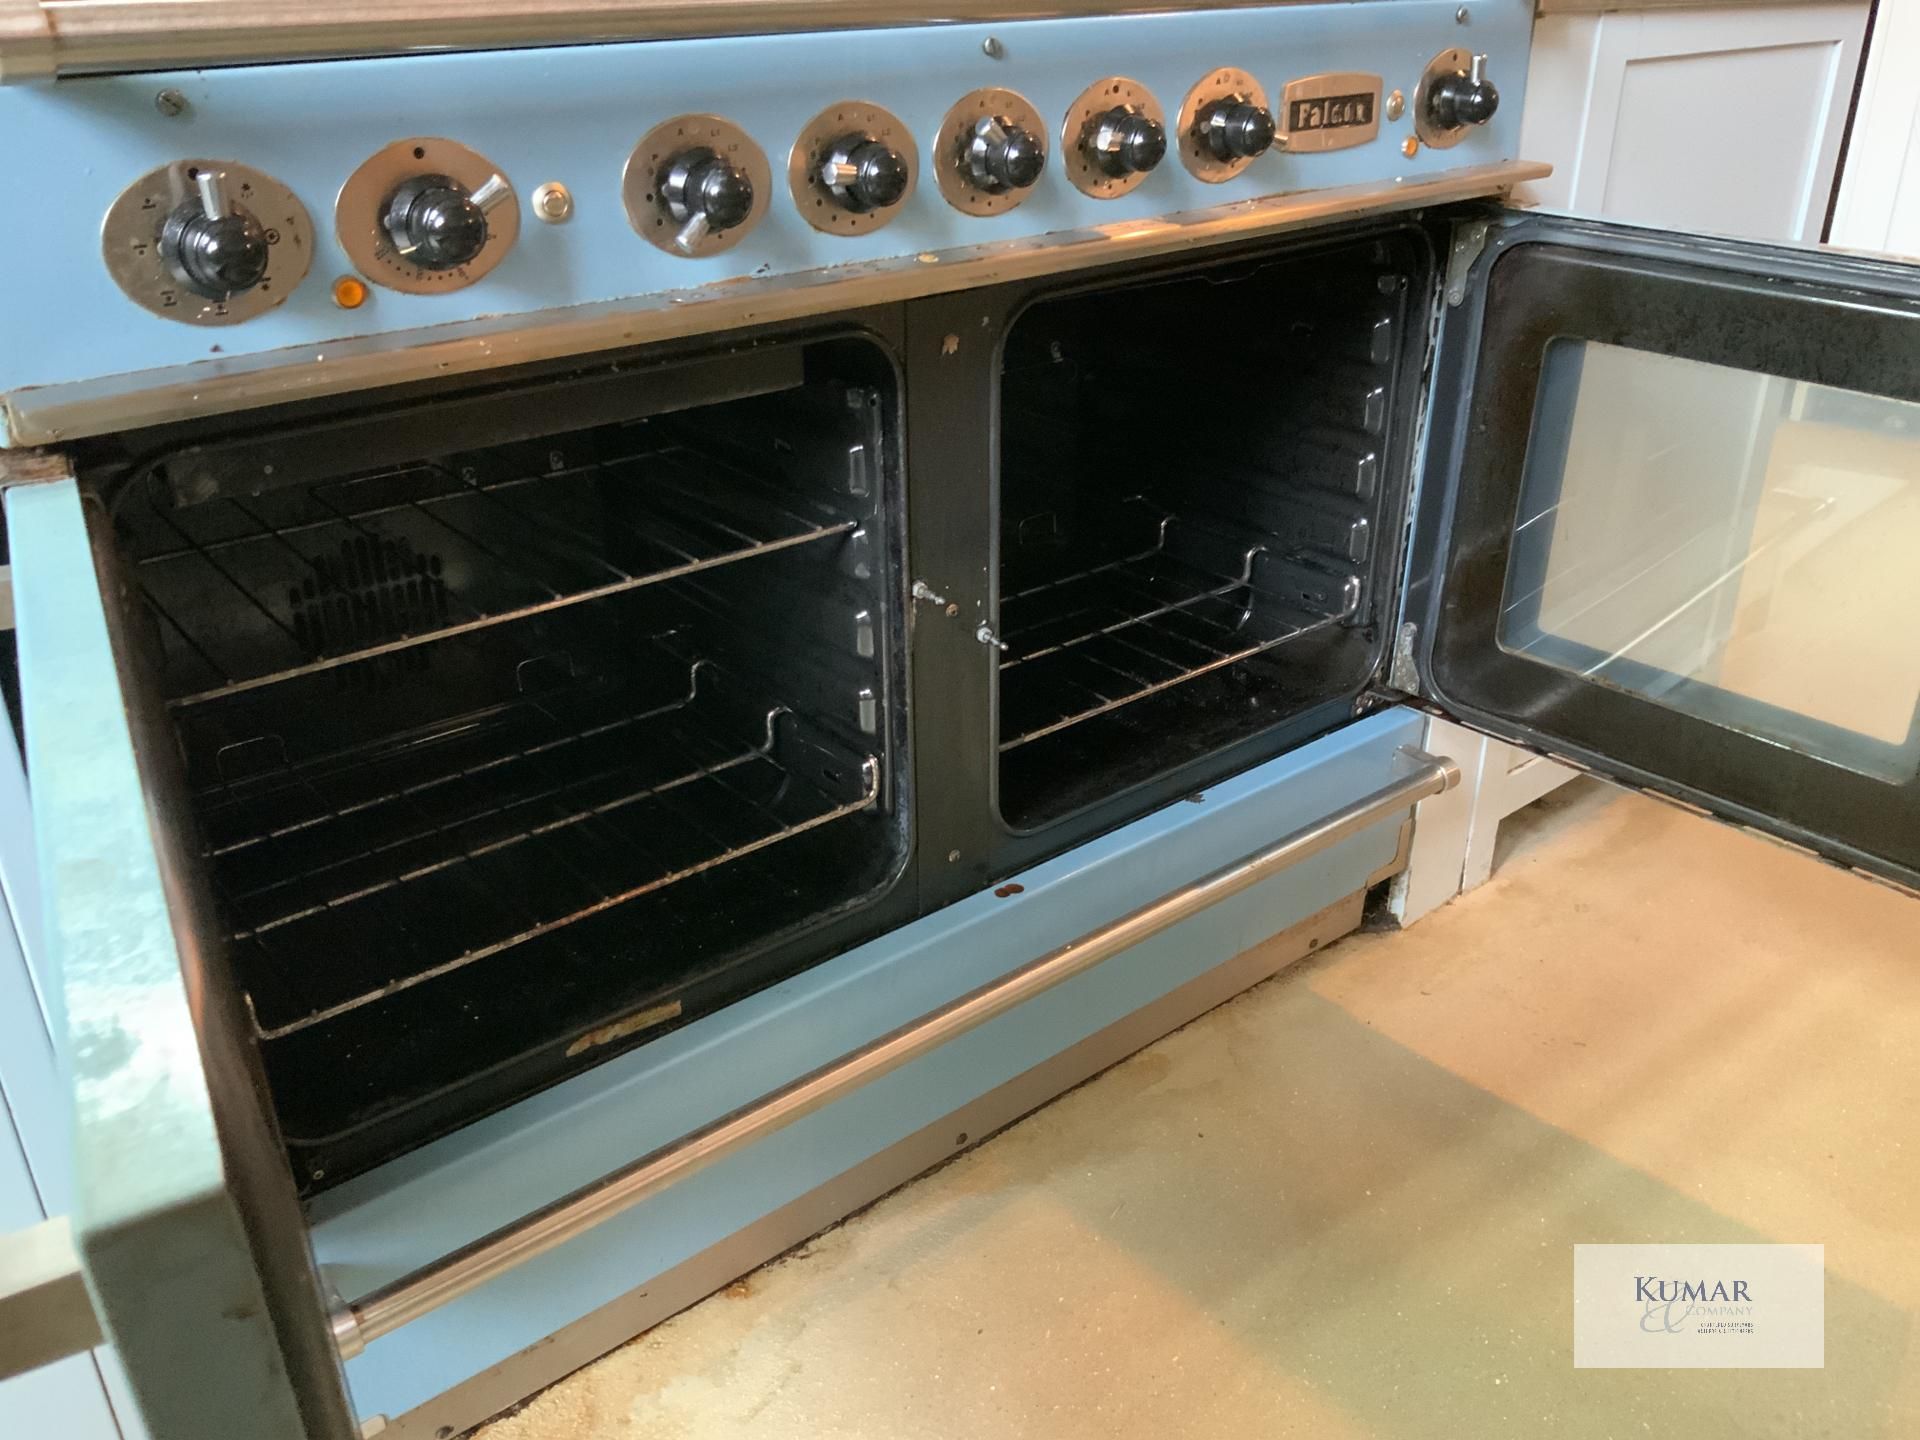 China Blue Aga Rangemaster Falcon Continental 1092 Range Cookers with Twin Ovens & 5 Position - Image 5 of 10